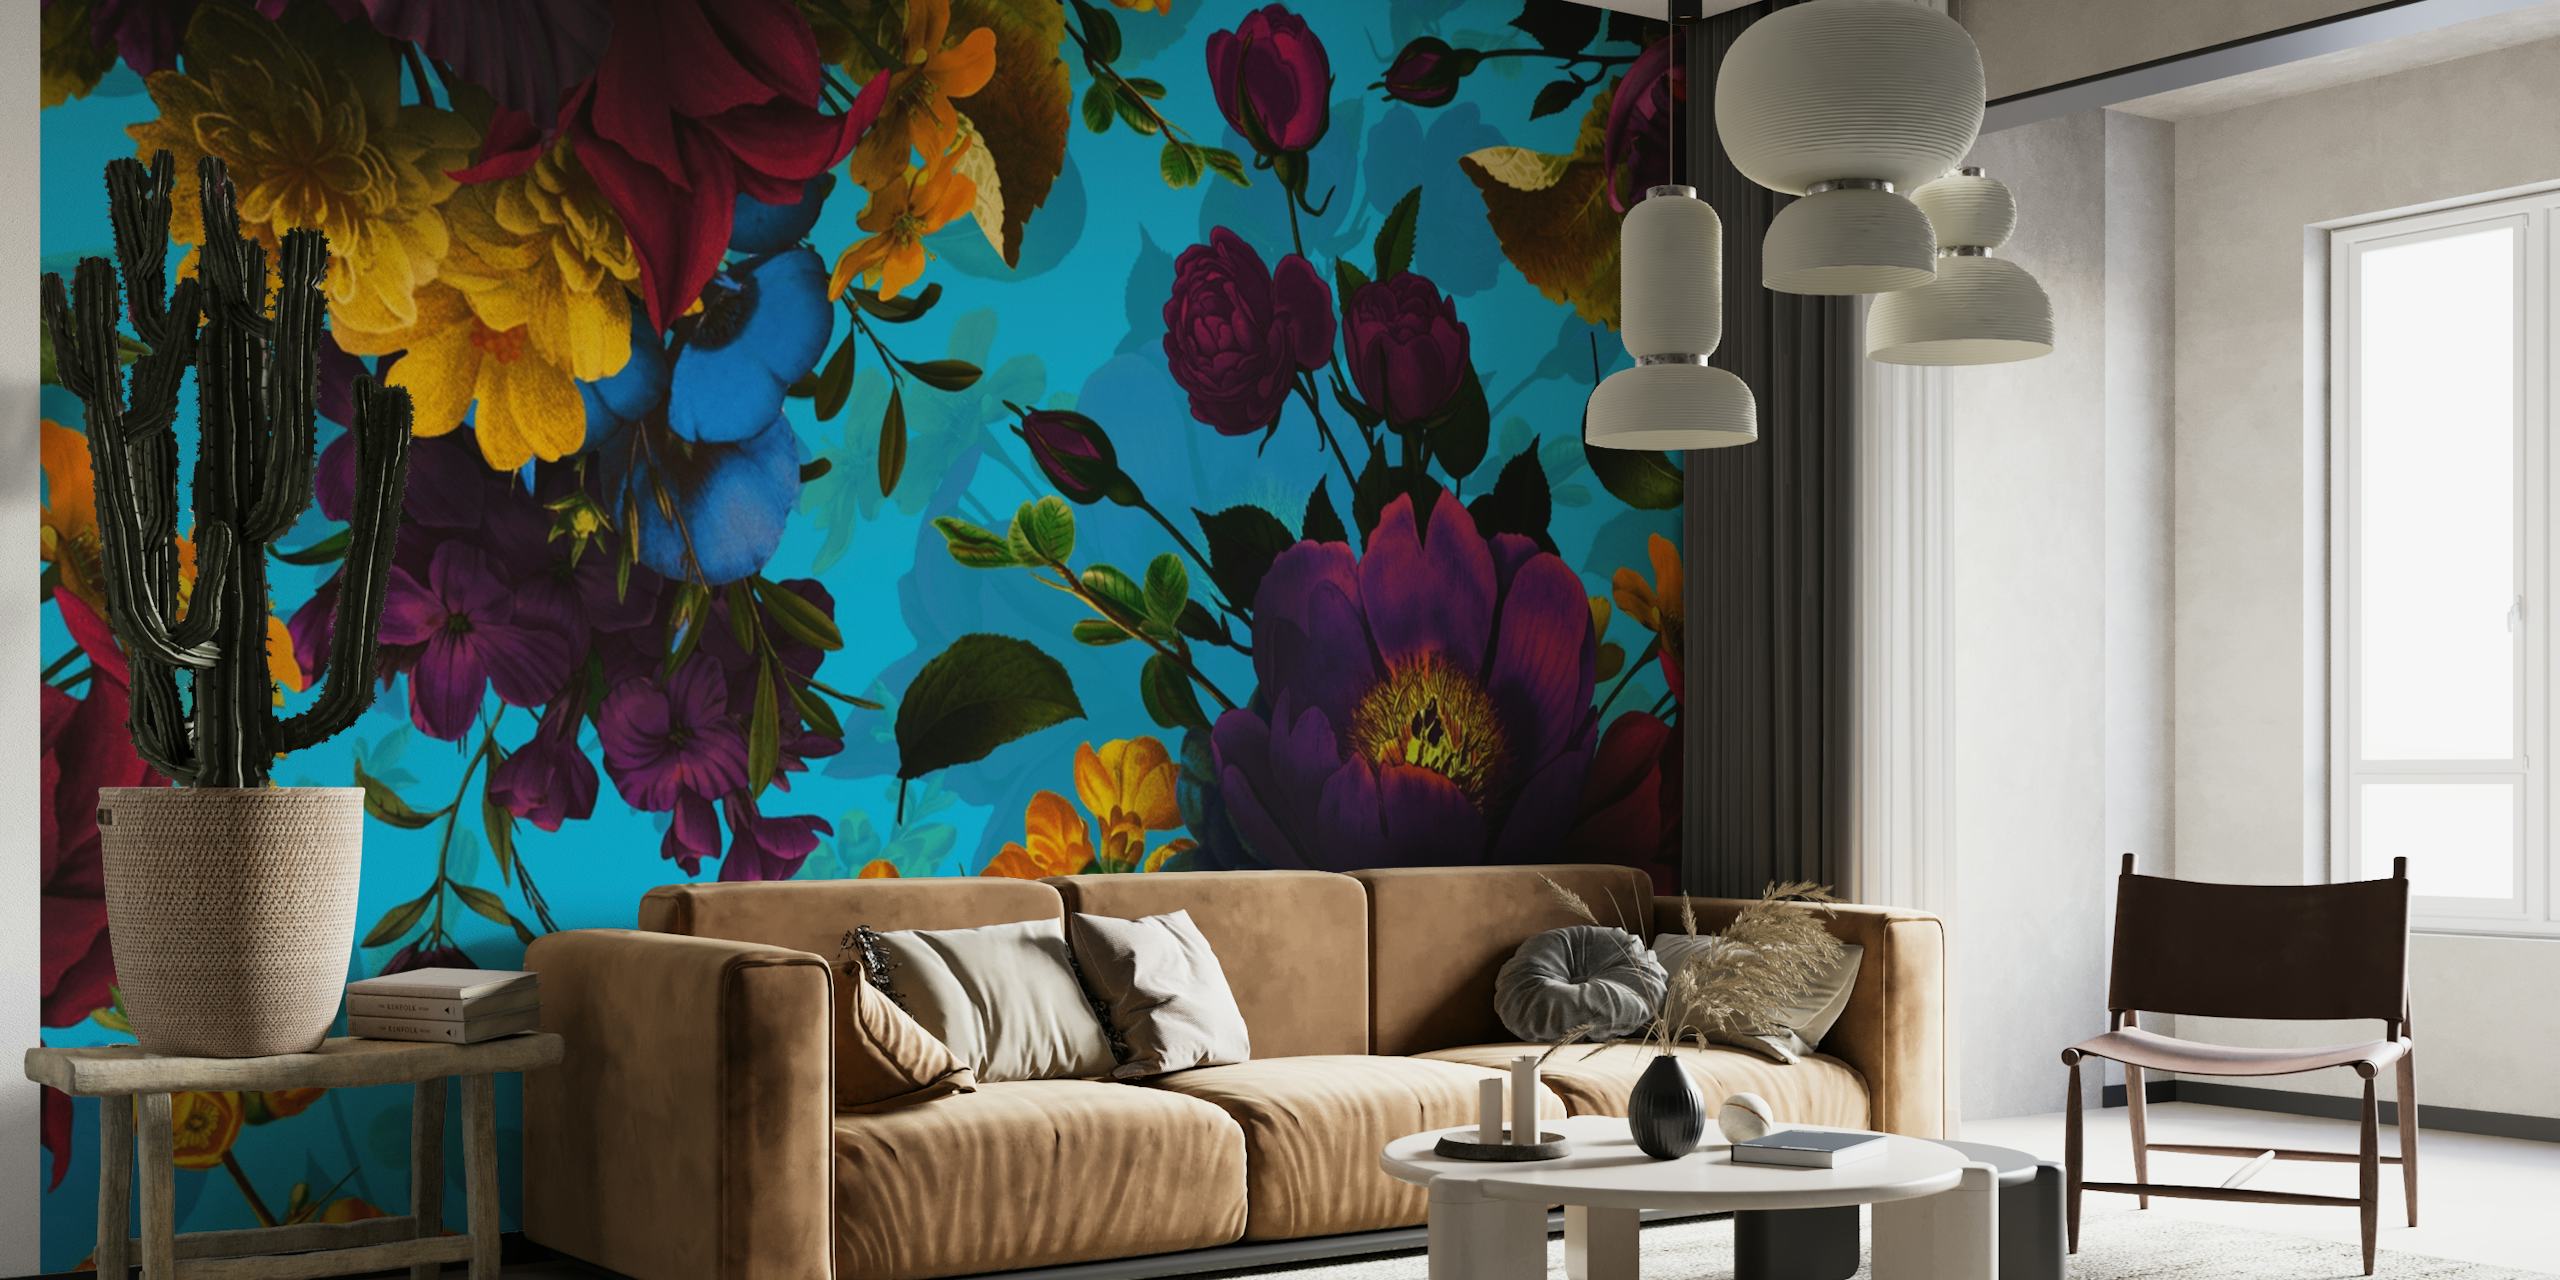 Vivid blue wall mural with bursts of colorful spring flowers in shades of yellow and red.